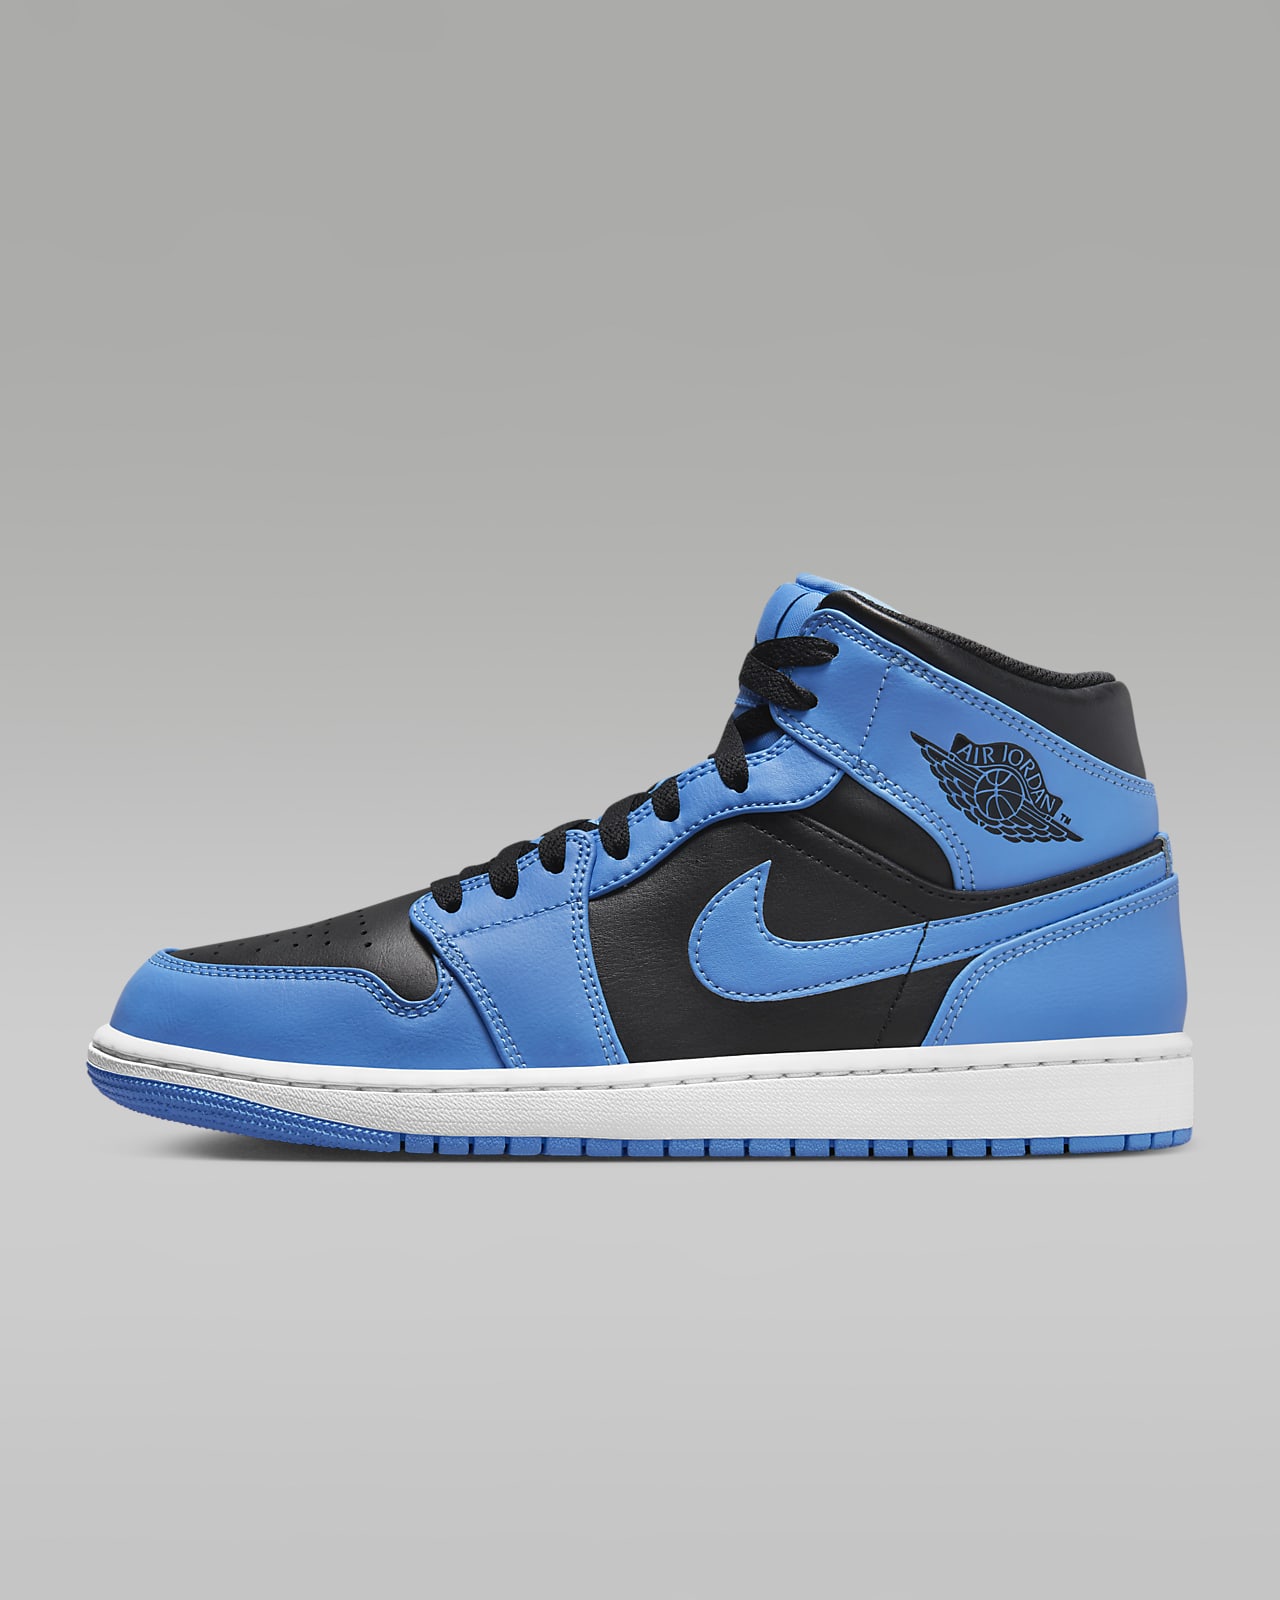 Exclusive Insider Secrets: How to Score Air Jordan 1 Mid Mens Shoes at Half the Price!